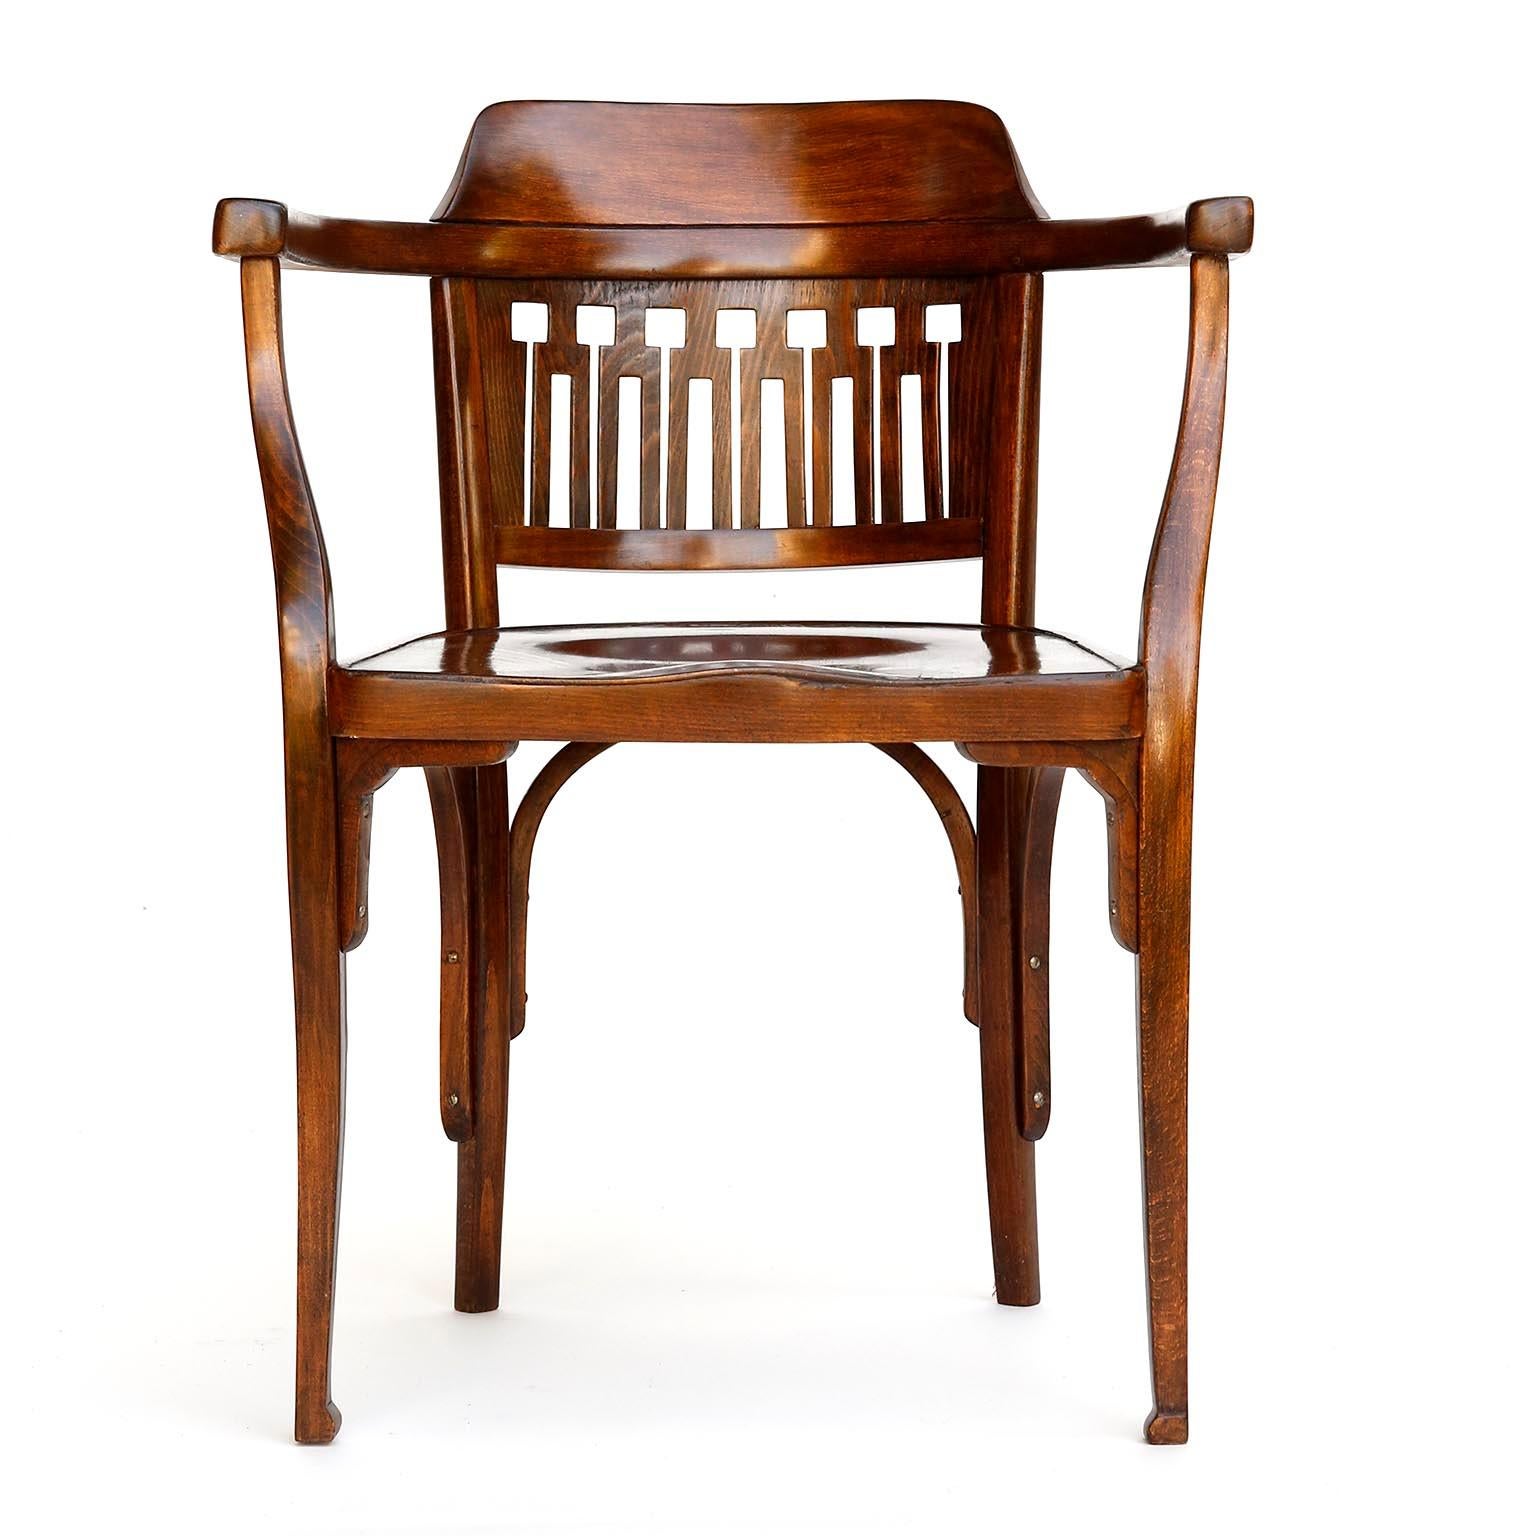 Beech Pair of Otto Wagner Chairs Armchairs by J.&J. Kohn, Austria, Vienna Secession